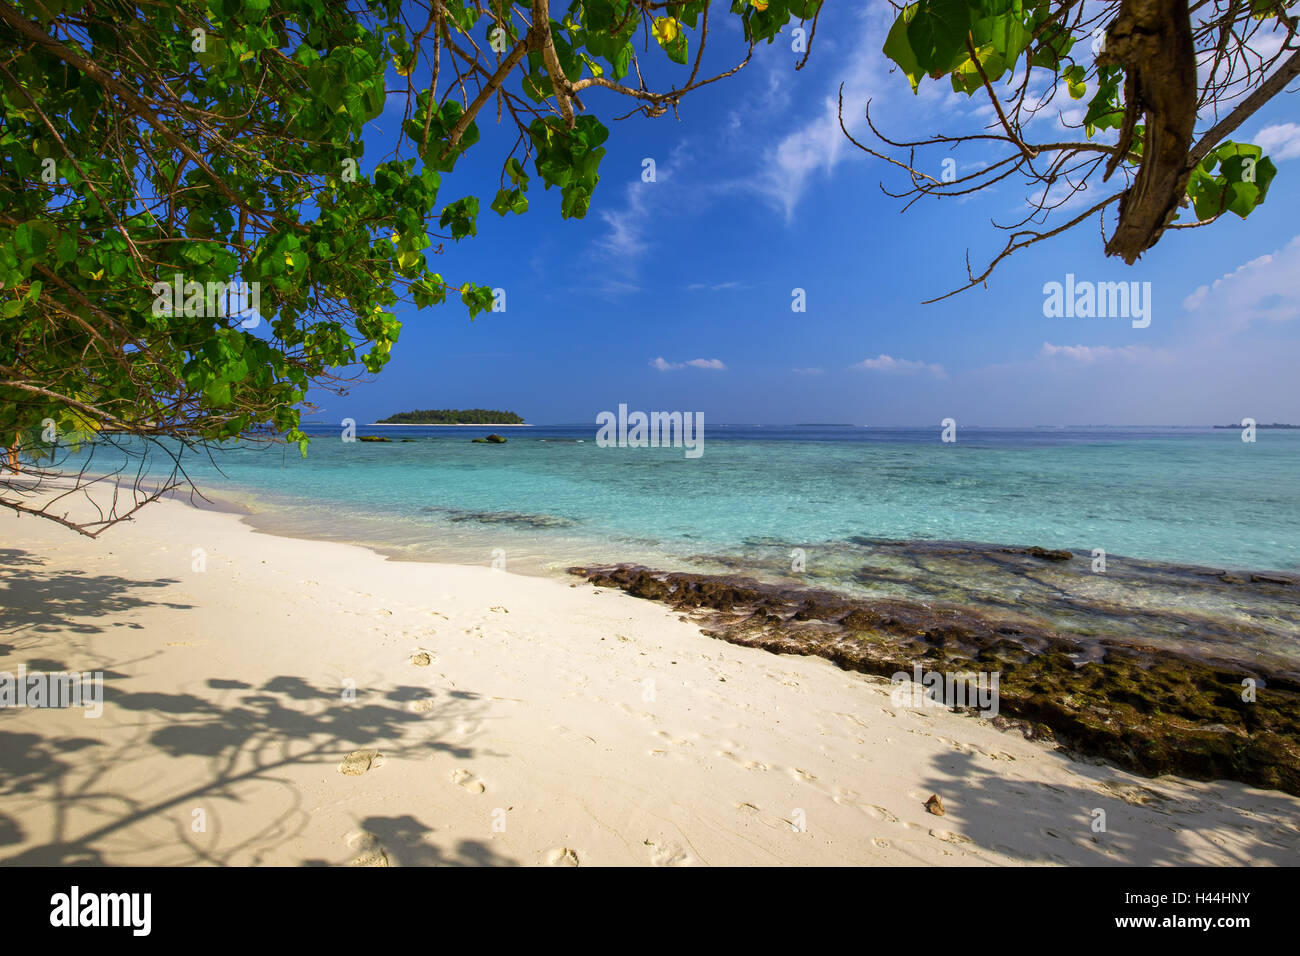 Tropical island with sandy beach with palm trees and turquoise clear water in Maldives Stock Photo